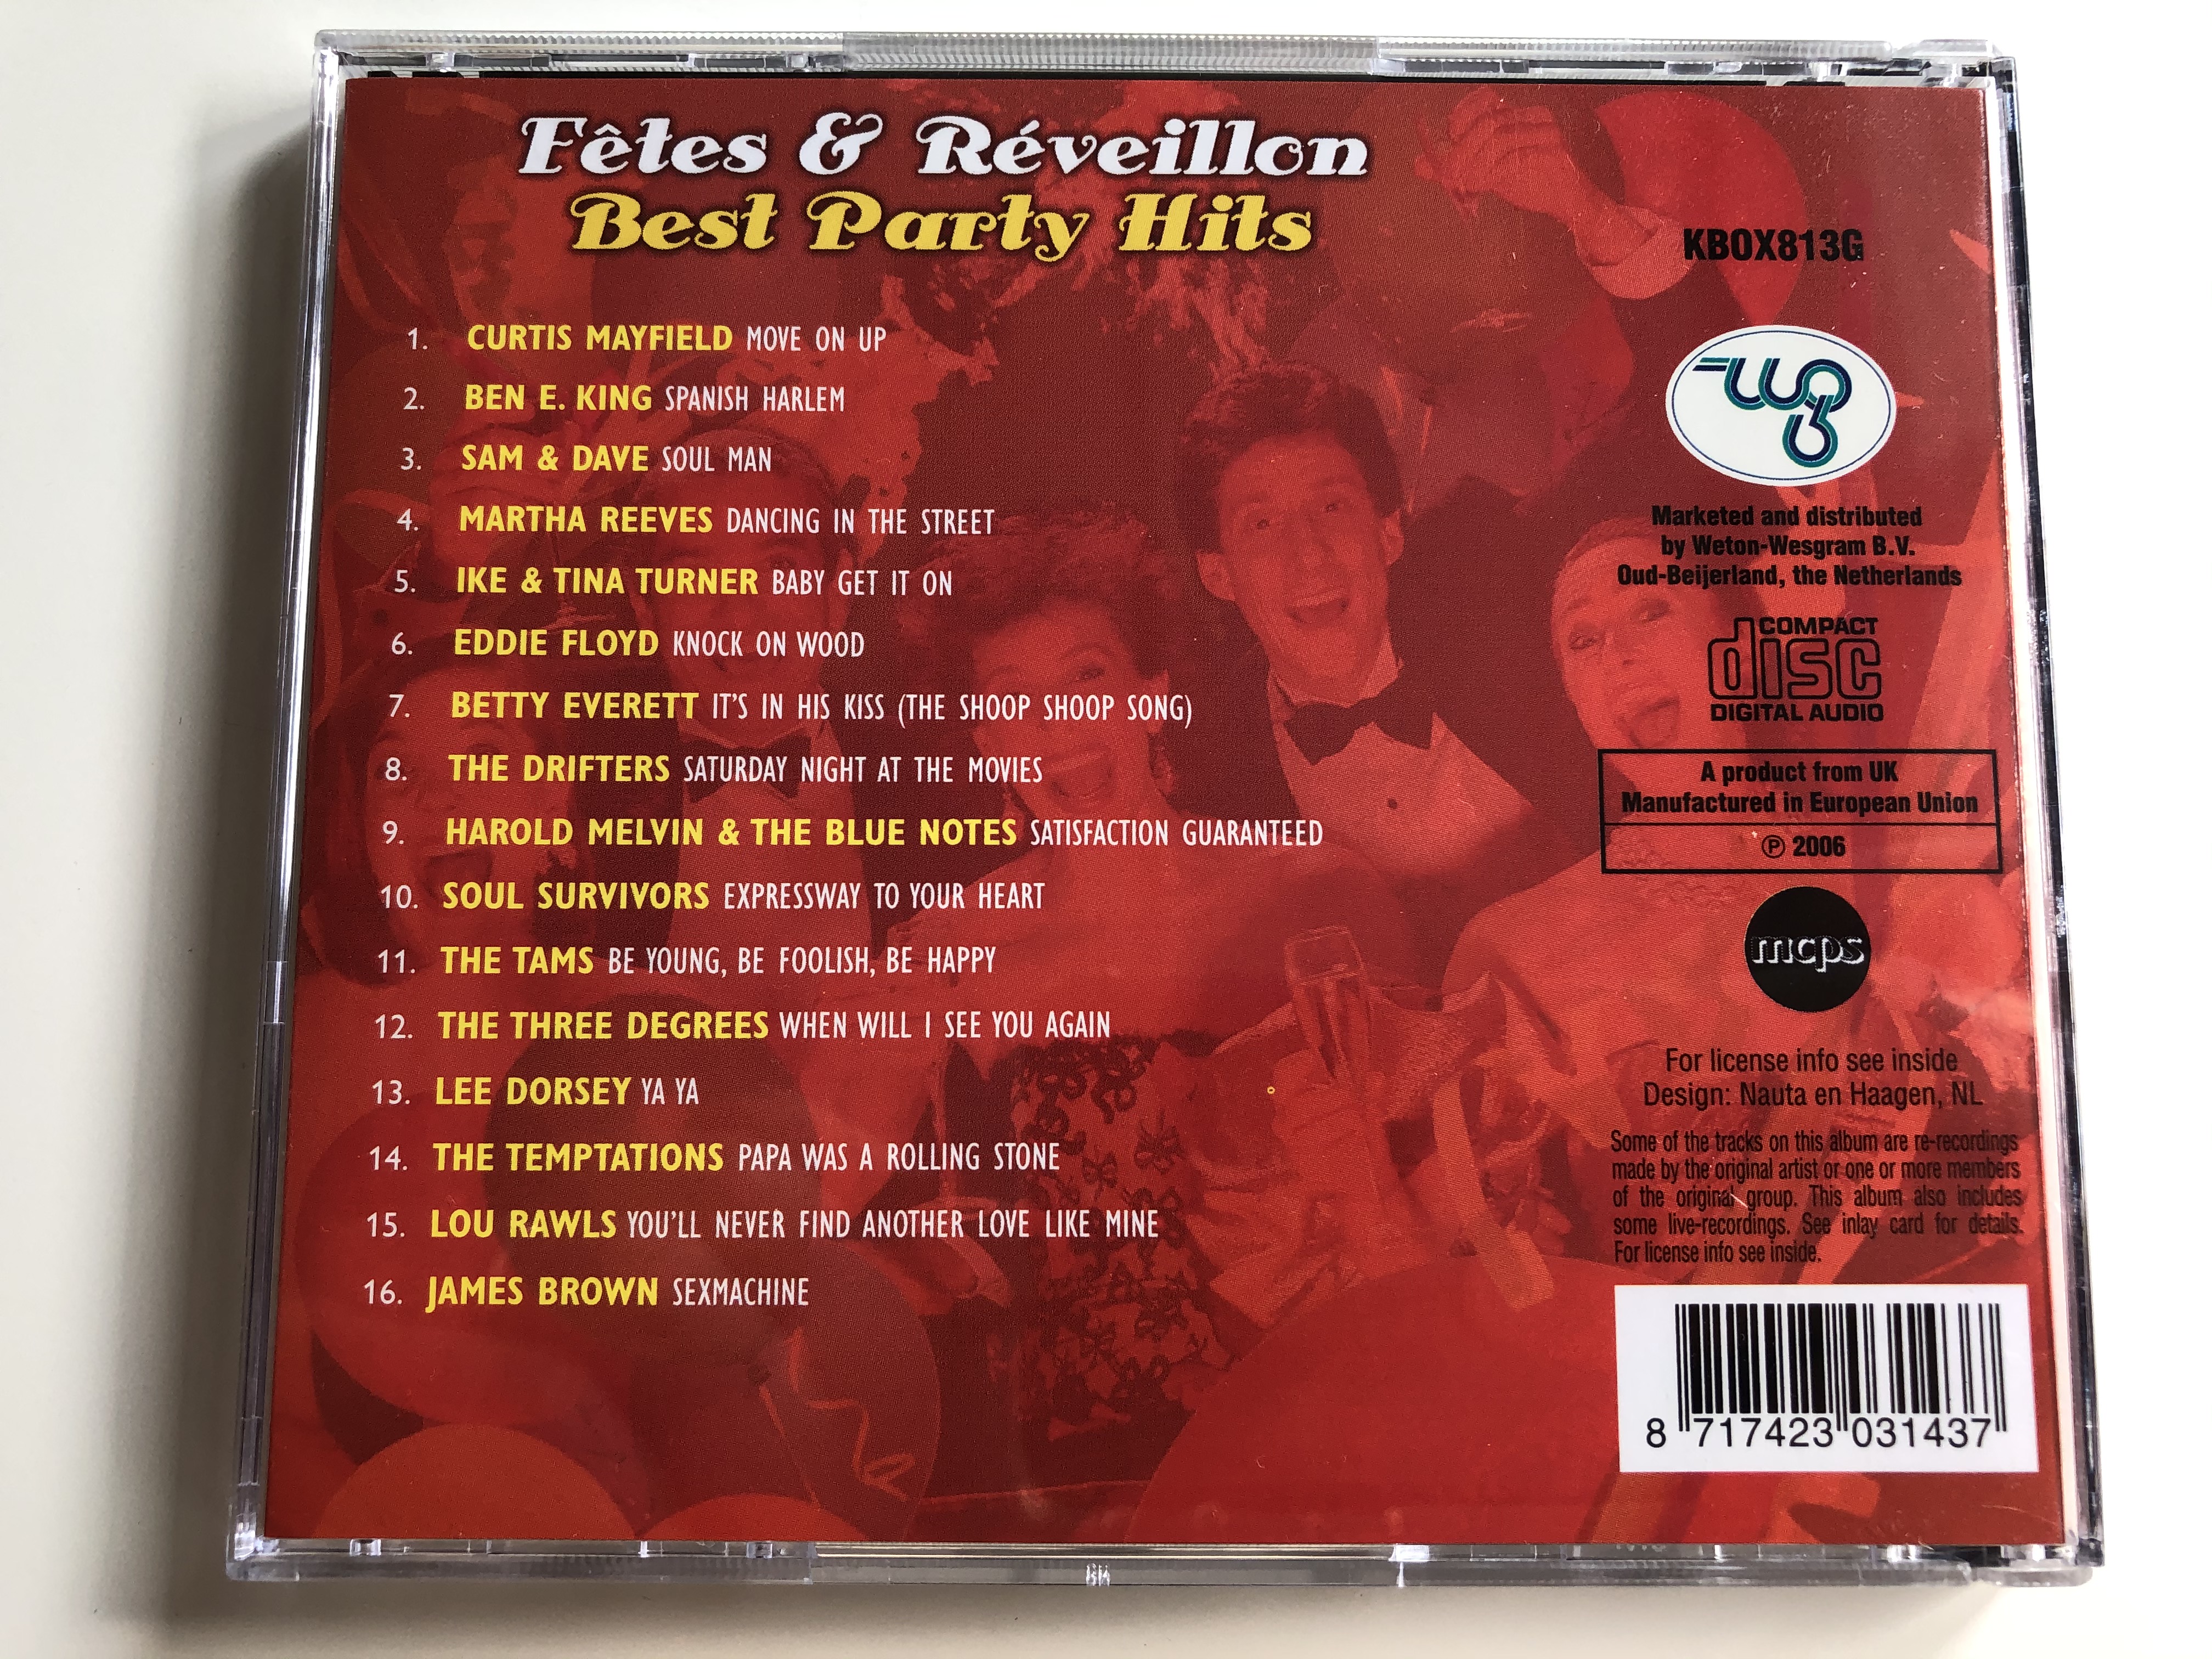 fetes-reveillon-best-party-hits-cd-7-move-on-up-spanish-harlem-soul-man-dancing-in-the-street-baby-get-it-on-knock-on-wood-saturday-night-at-the-movies-audio-cd-2006-kbox813g-4-.jpg